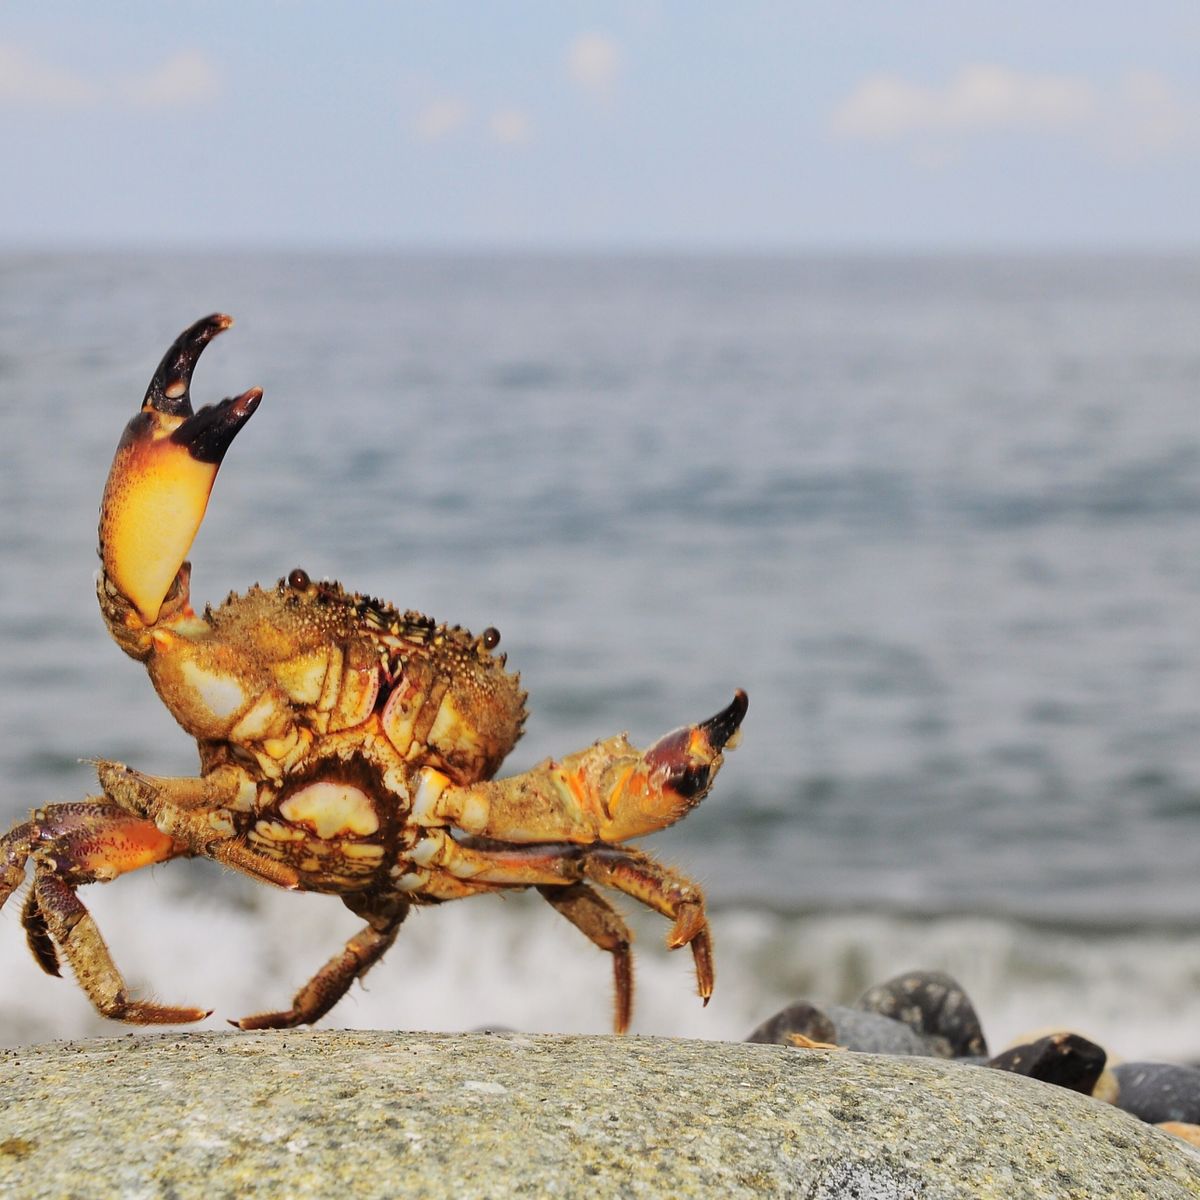 Was a 50-Foot Crab Spotted in England?